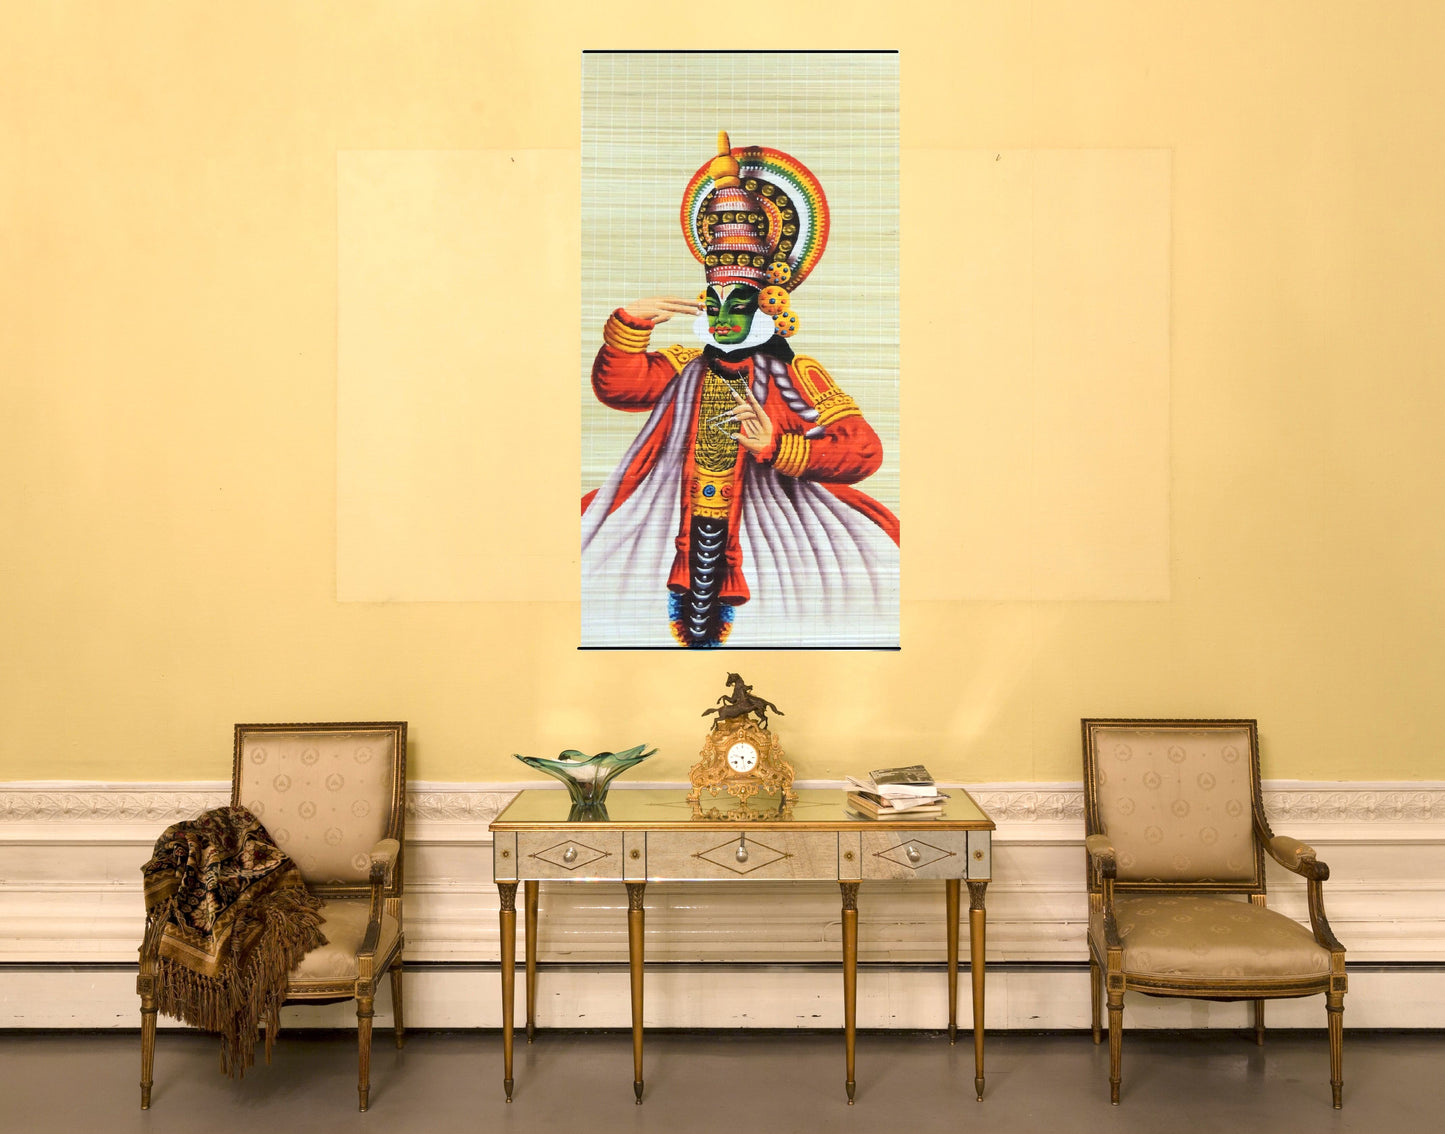 ZENRISE Kathakali Hand Painted Art on Woven Bamboo mat Wall Hanging Painting (Multicolour, 22x45 inches)